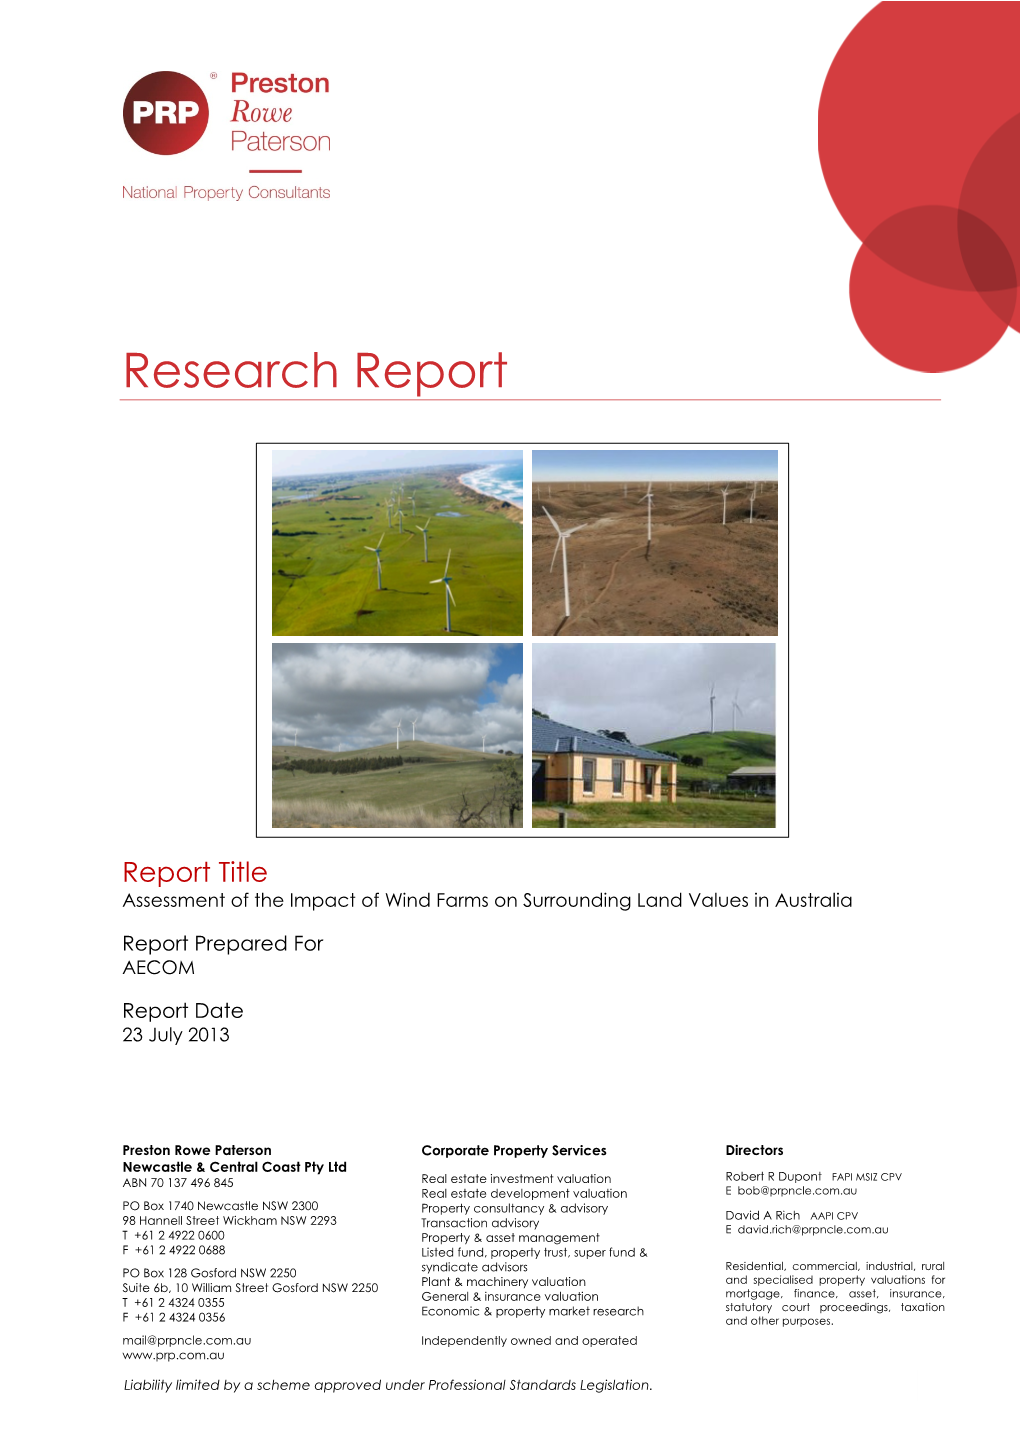 Assessment of Impact of Wind Farms on Surrounding Land Values